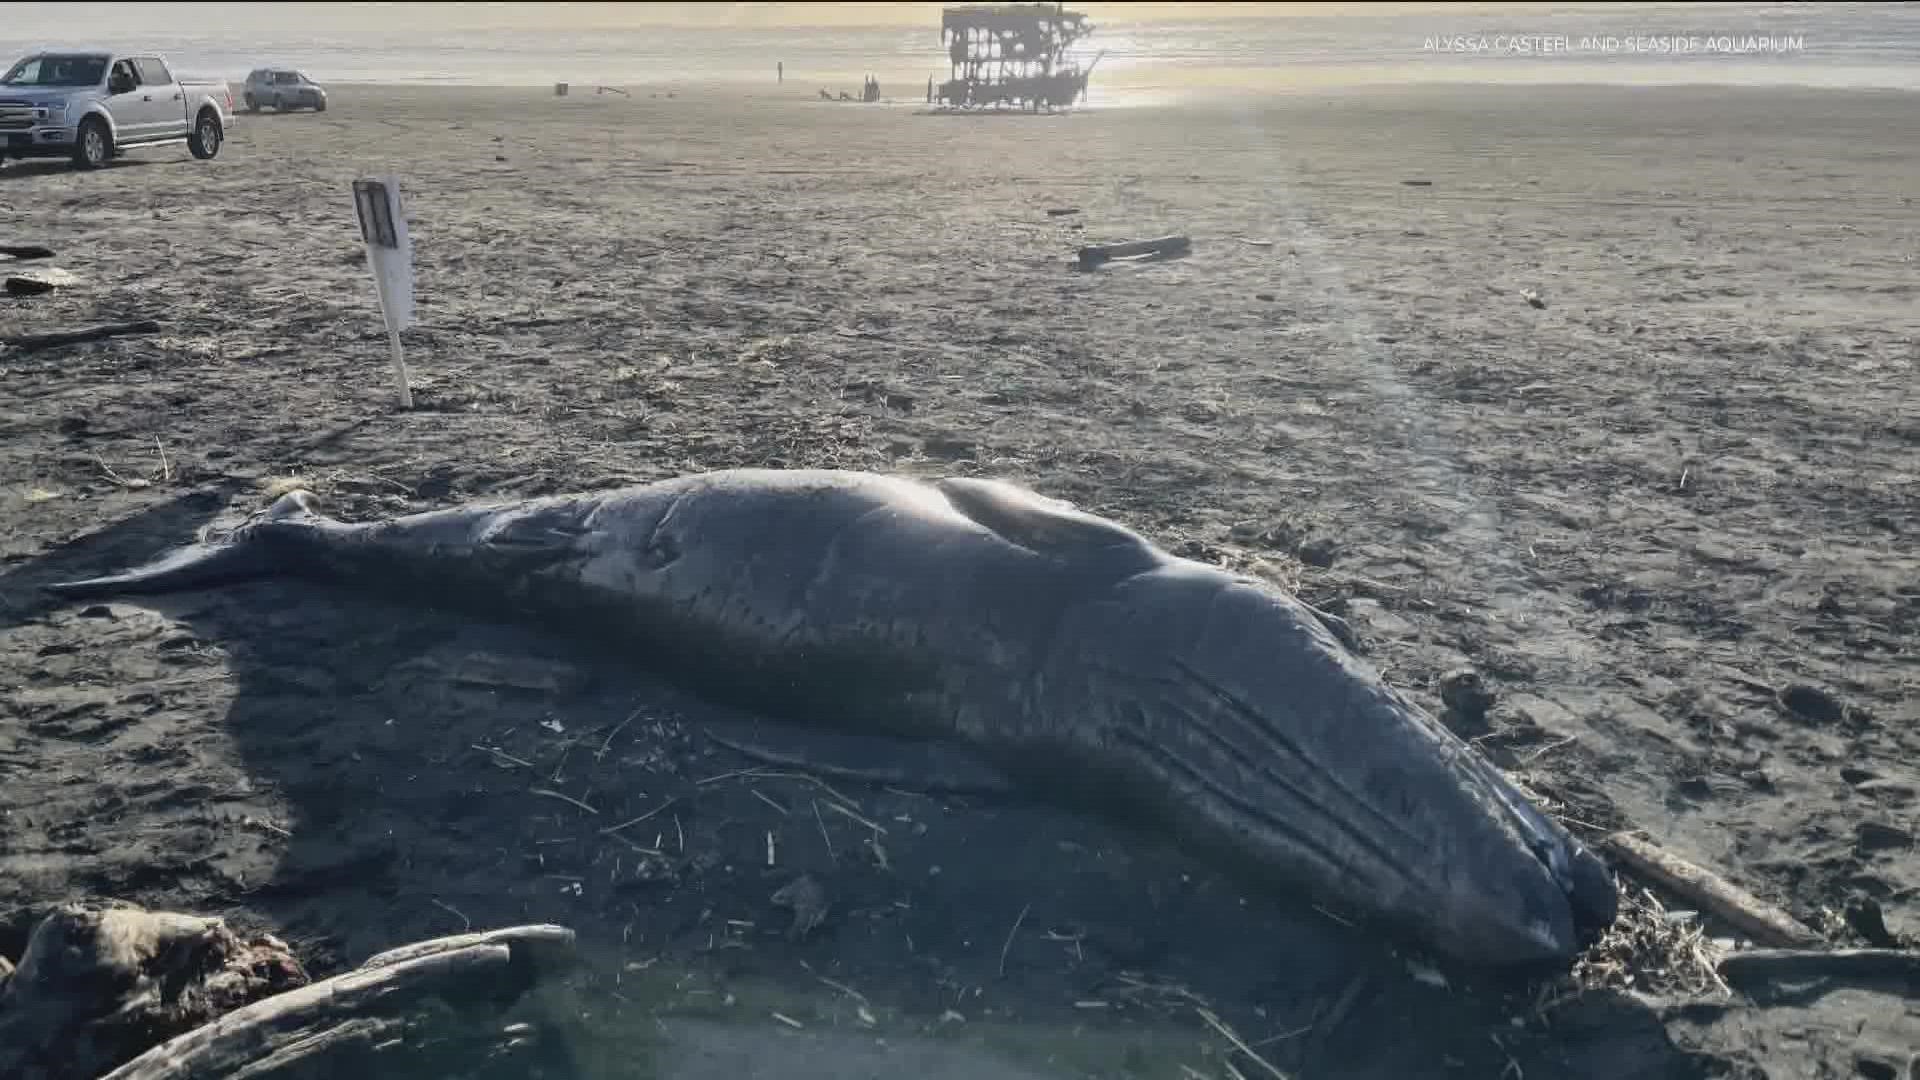 A gray whale calf washed ashore about 100 yards north of the sperm whale that washed up over the weekend. Another dead whale washed up in Winchester Bay on Jan. 11.